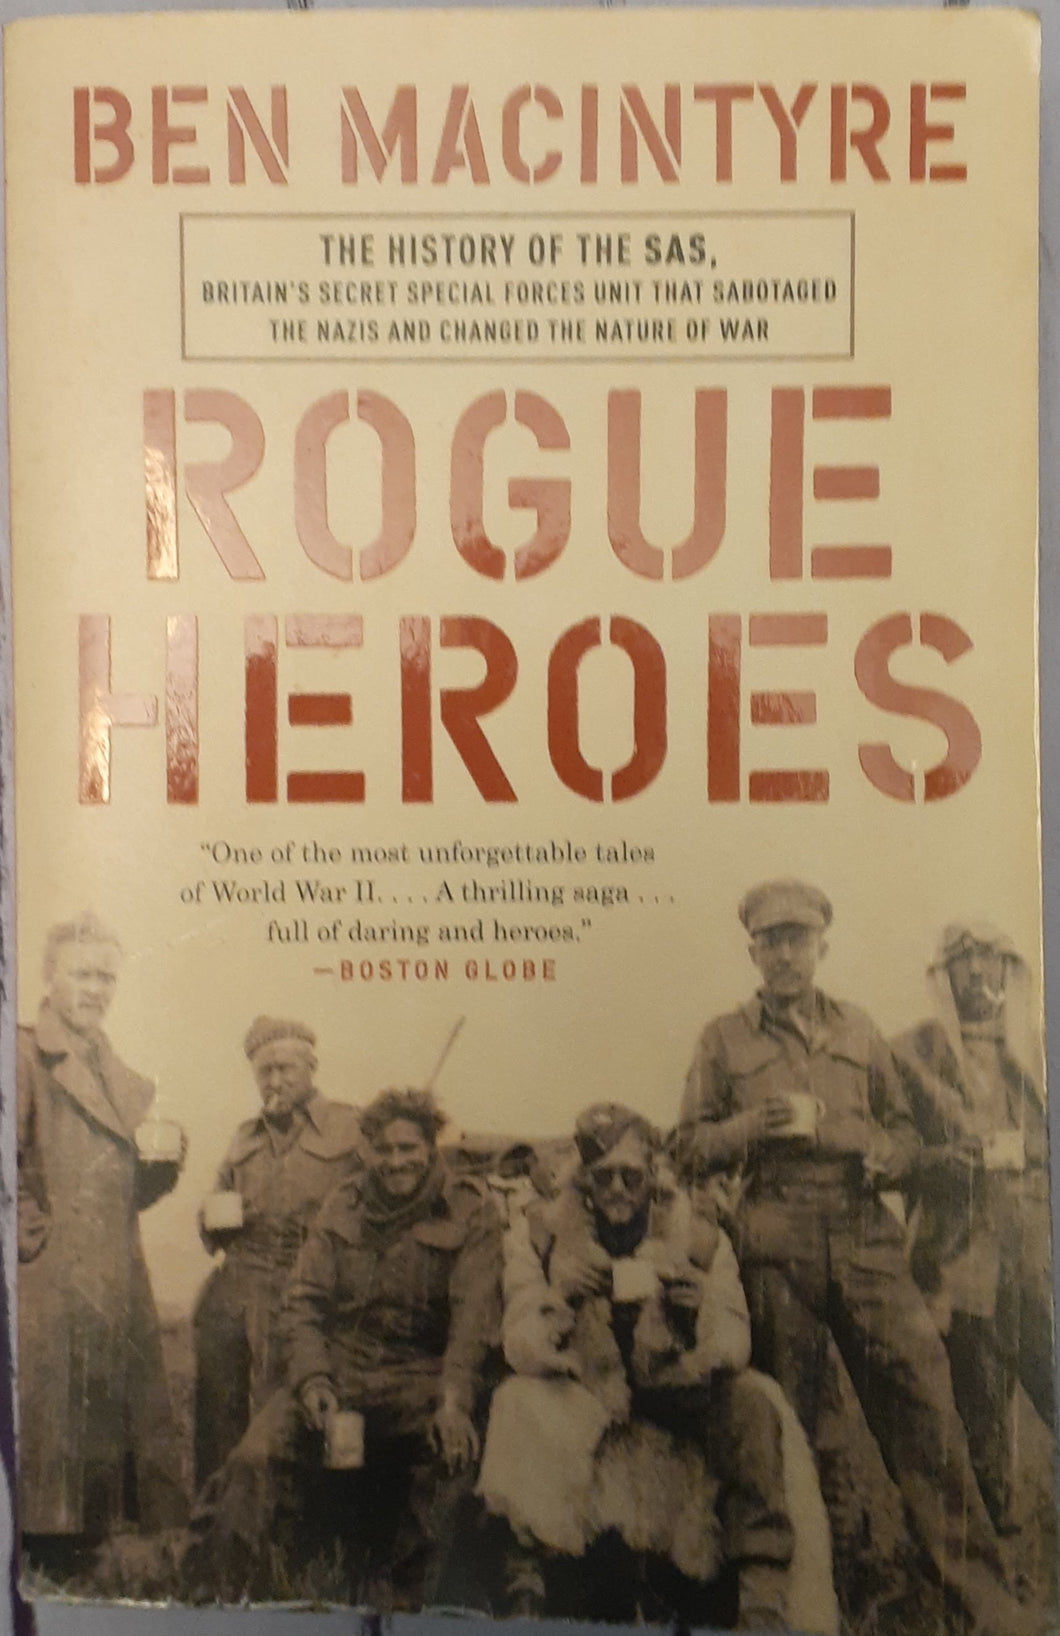 Rogue Heroes - The History of the SAS, Britain's Secret Special Forces Unit That Sabotaged the Nazis and Changed the Nature of War